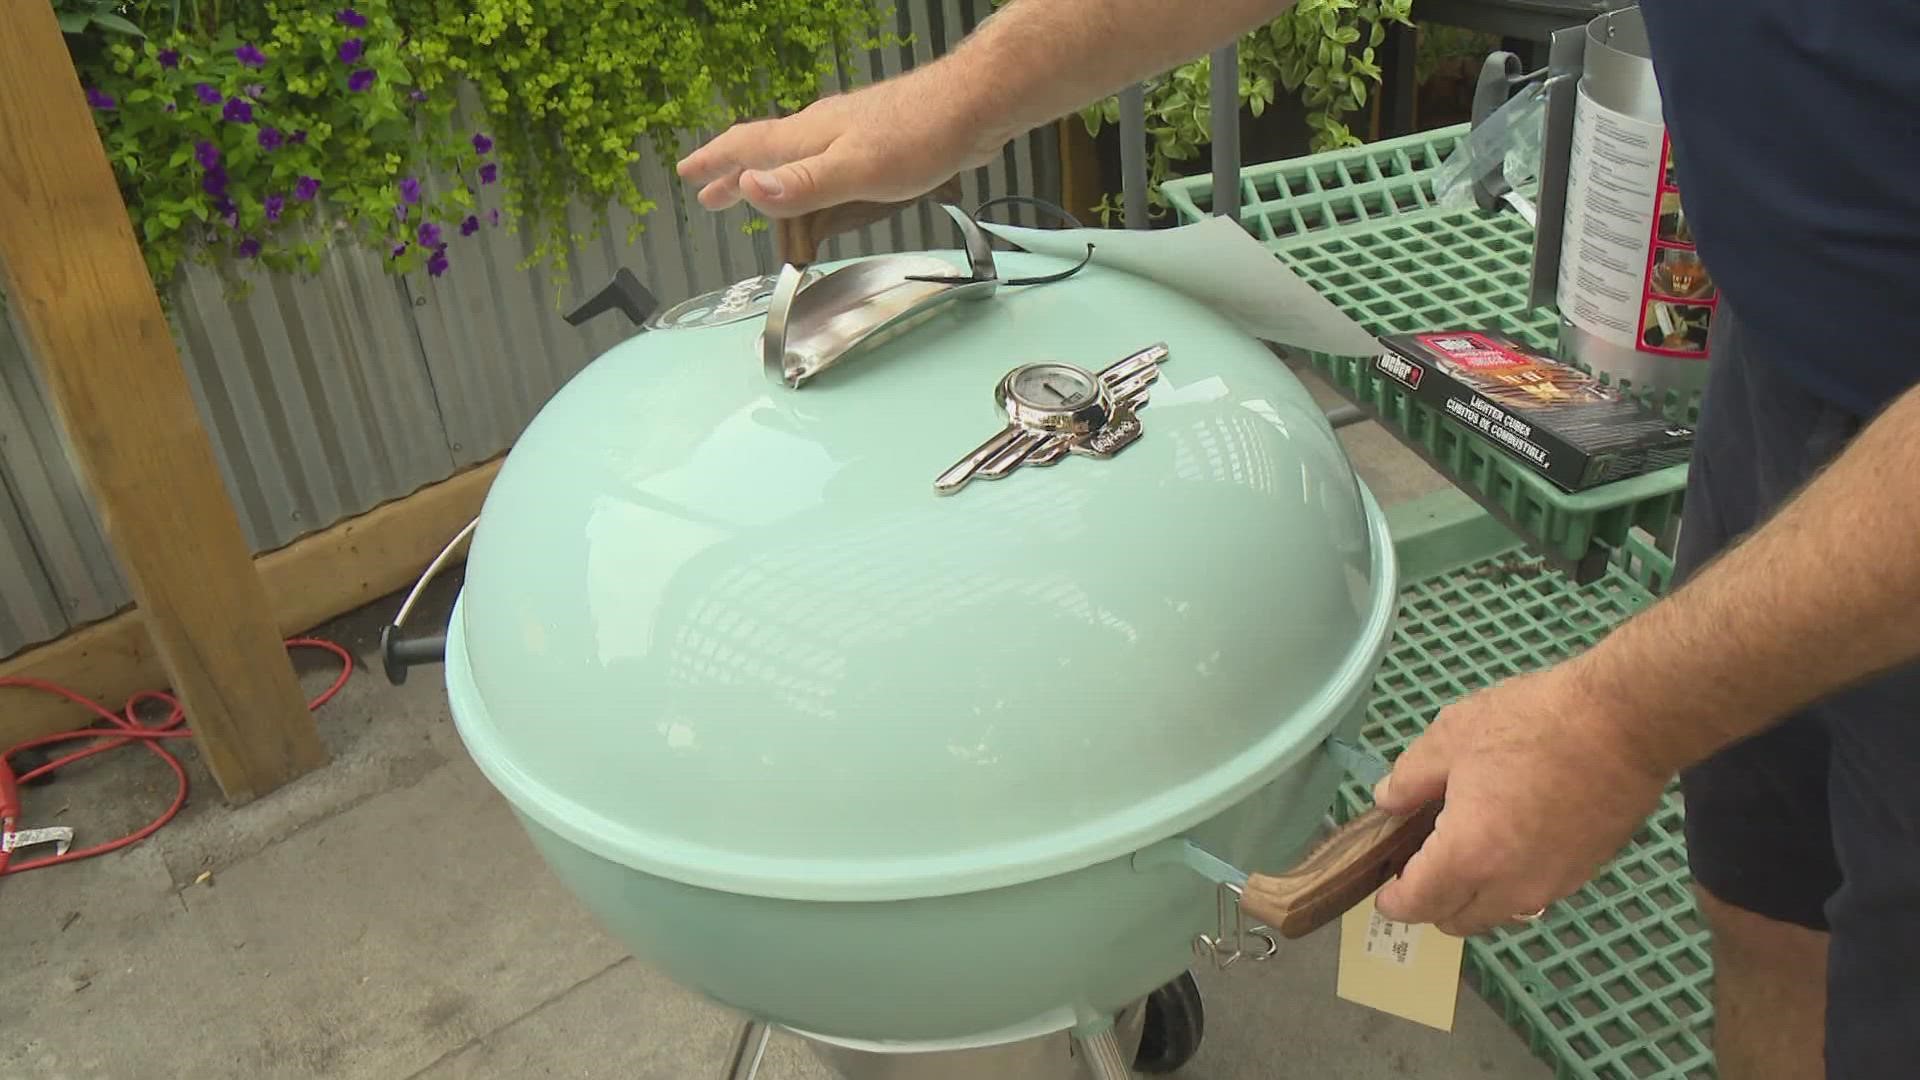 Pat Sullivan shares tips on how to grill safely ahead of Labor Day weekend.